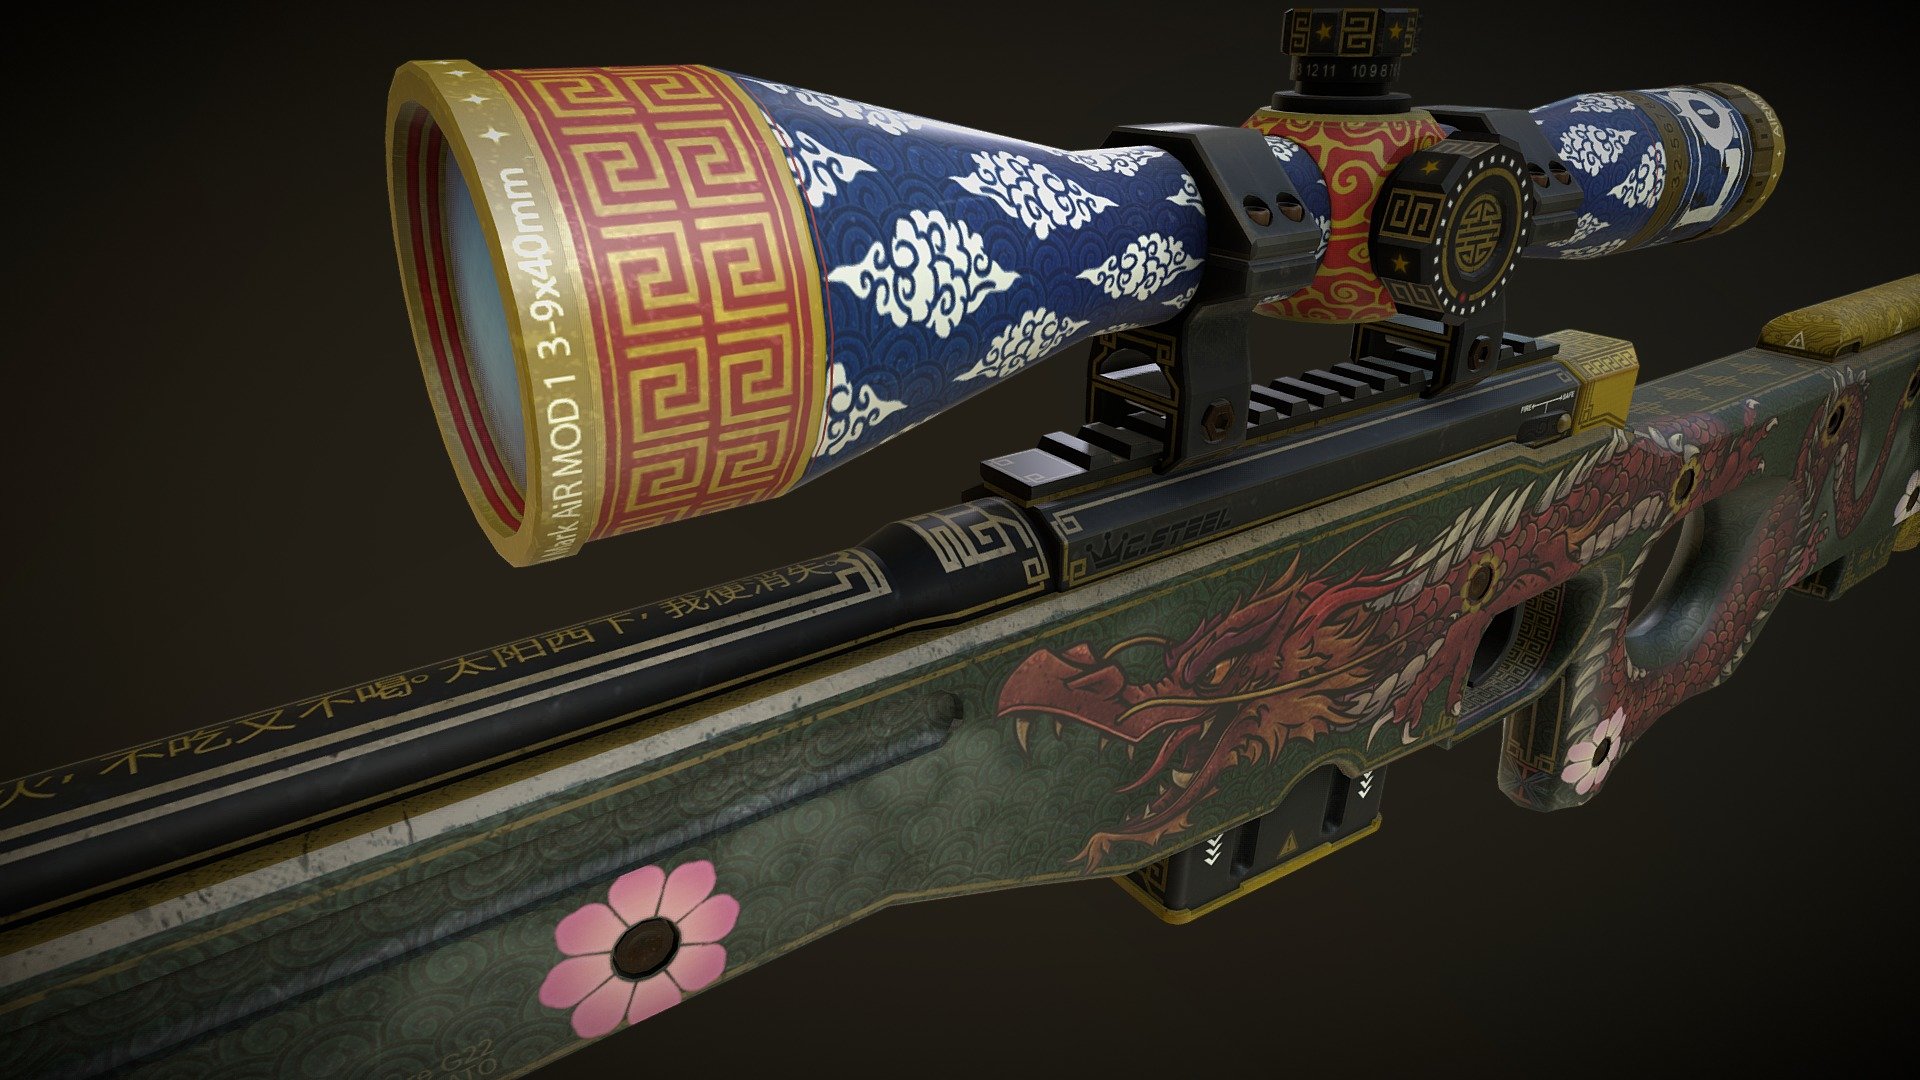 A new lor has arrived!

If u guys want to see more&hellip; 
http://steamcommunity.com/sharedfiles/filedetails/?id=1096320018

Thanks for awesome support!
Seeya! - AWP LonGUN - 3D model by Olovely 3d model